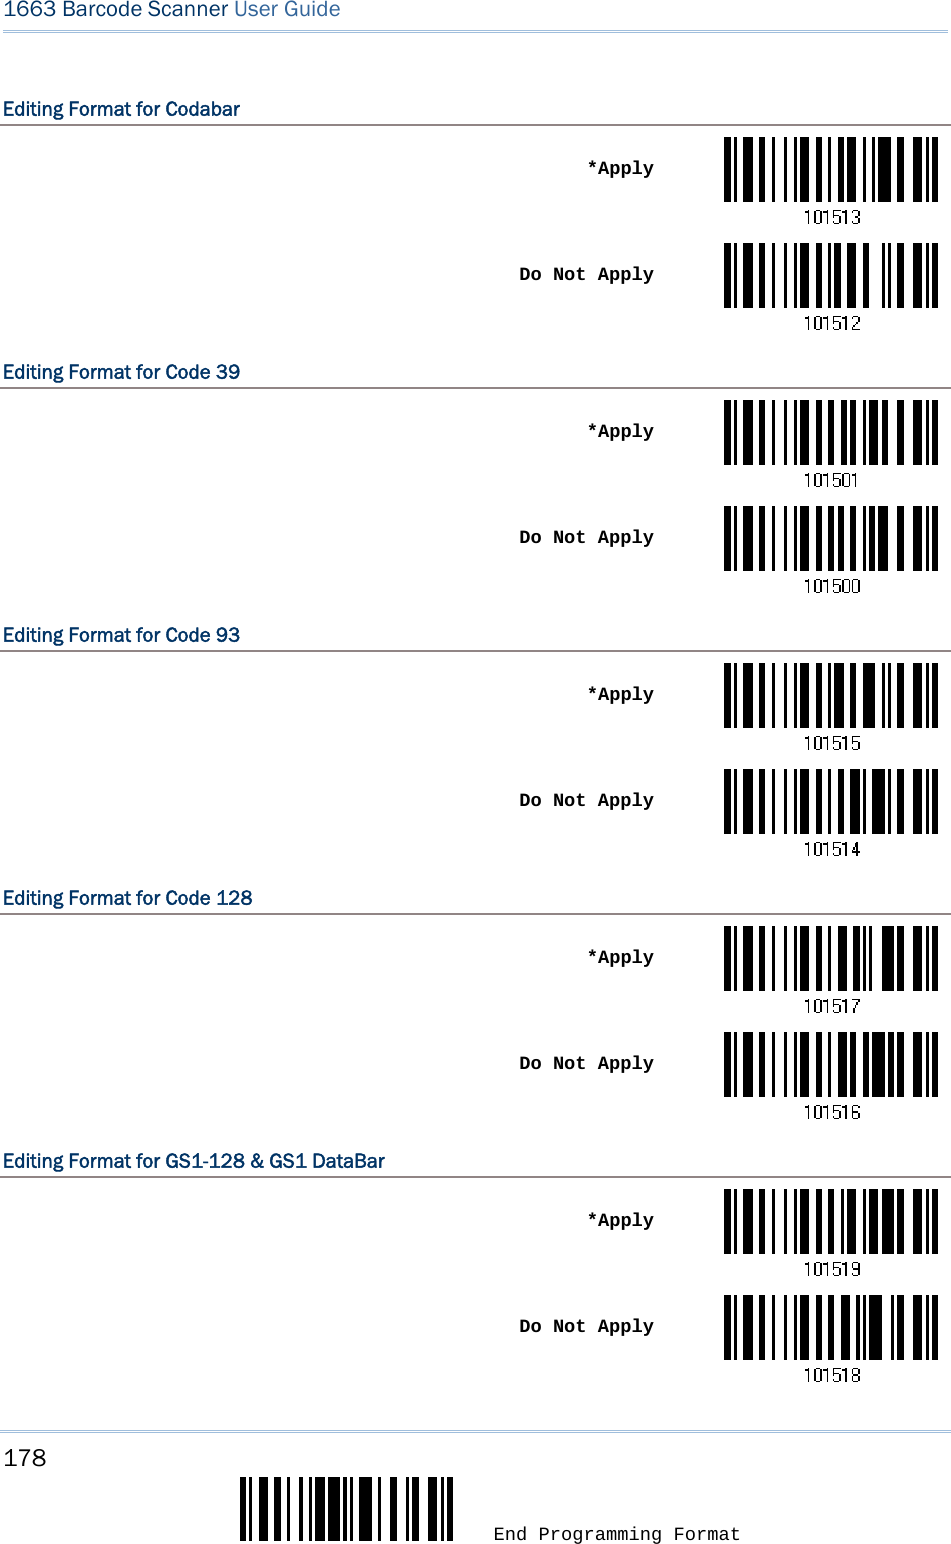 178  End Programming Format 1663 Barcode Scanner User Guide  Editing Format for Codabar  *Apply Do Not ApplyEditing Format for Code 39  *Apply Do Not ApplyEditing Format for Code 93  *Apply Do Not ApplyEditing Format for Code 128  *Apply Do Not ApplyEditing Format for GS1-128 &amp; GS1 DataBar  *Apply Do Not Apply